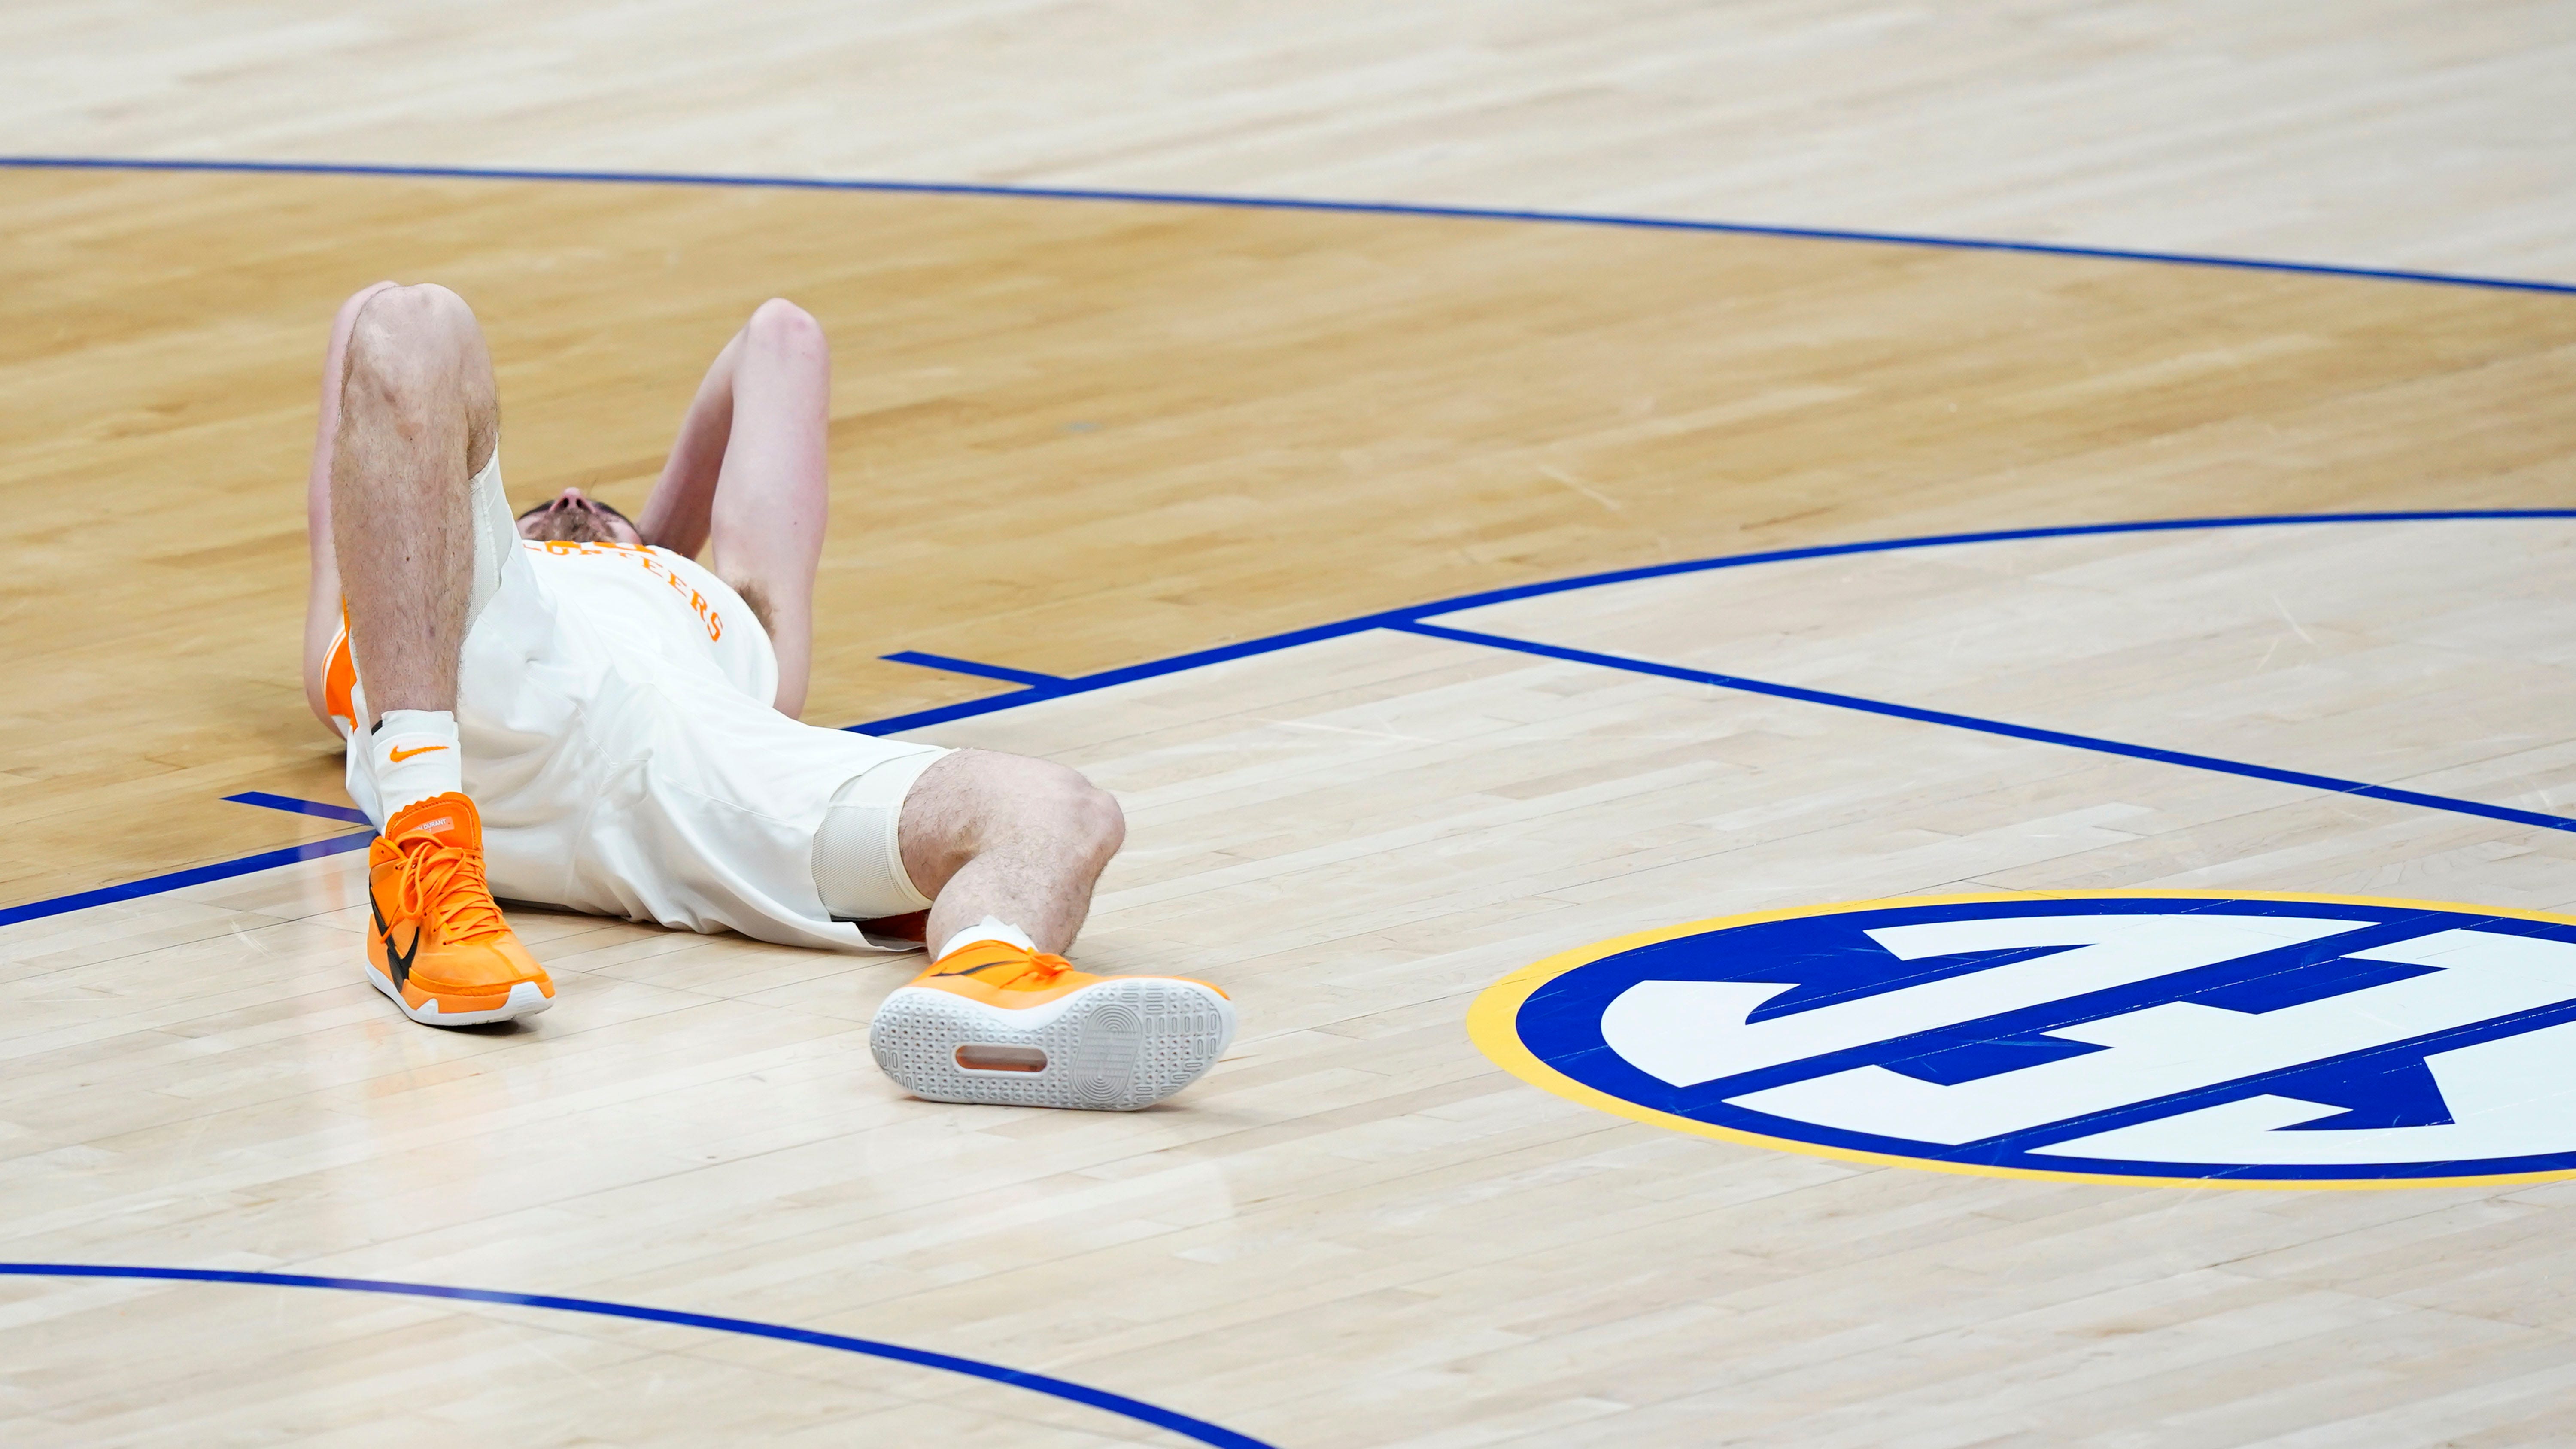 Volunteer John Fulkerson will miss the rest of the SEC tournament with facial injuries after ‘dirty play’